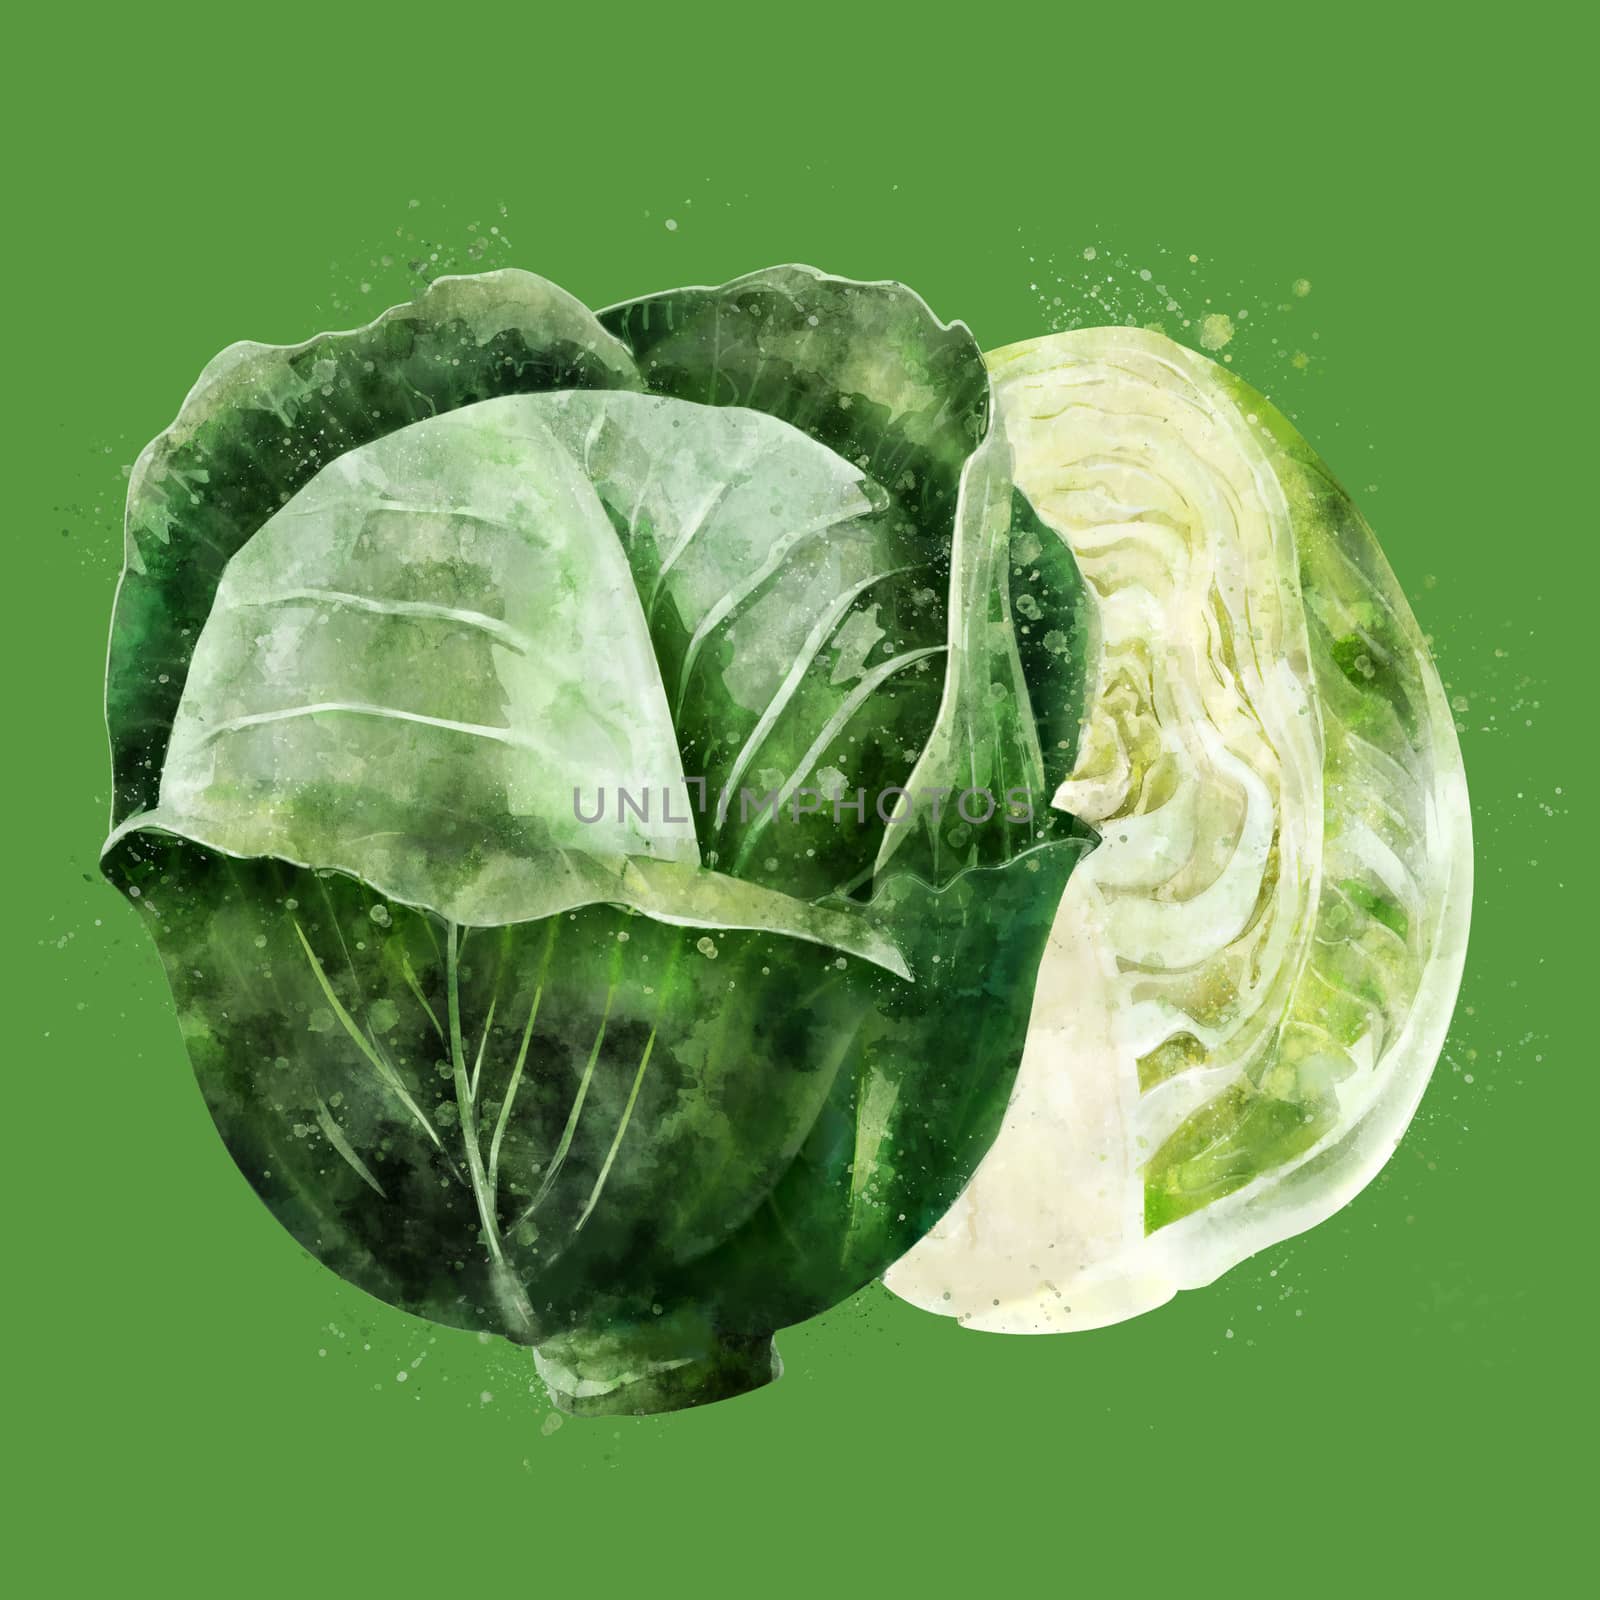 Cabbage, illustration on a green background